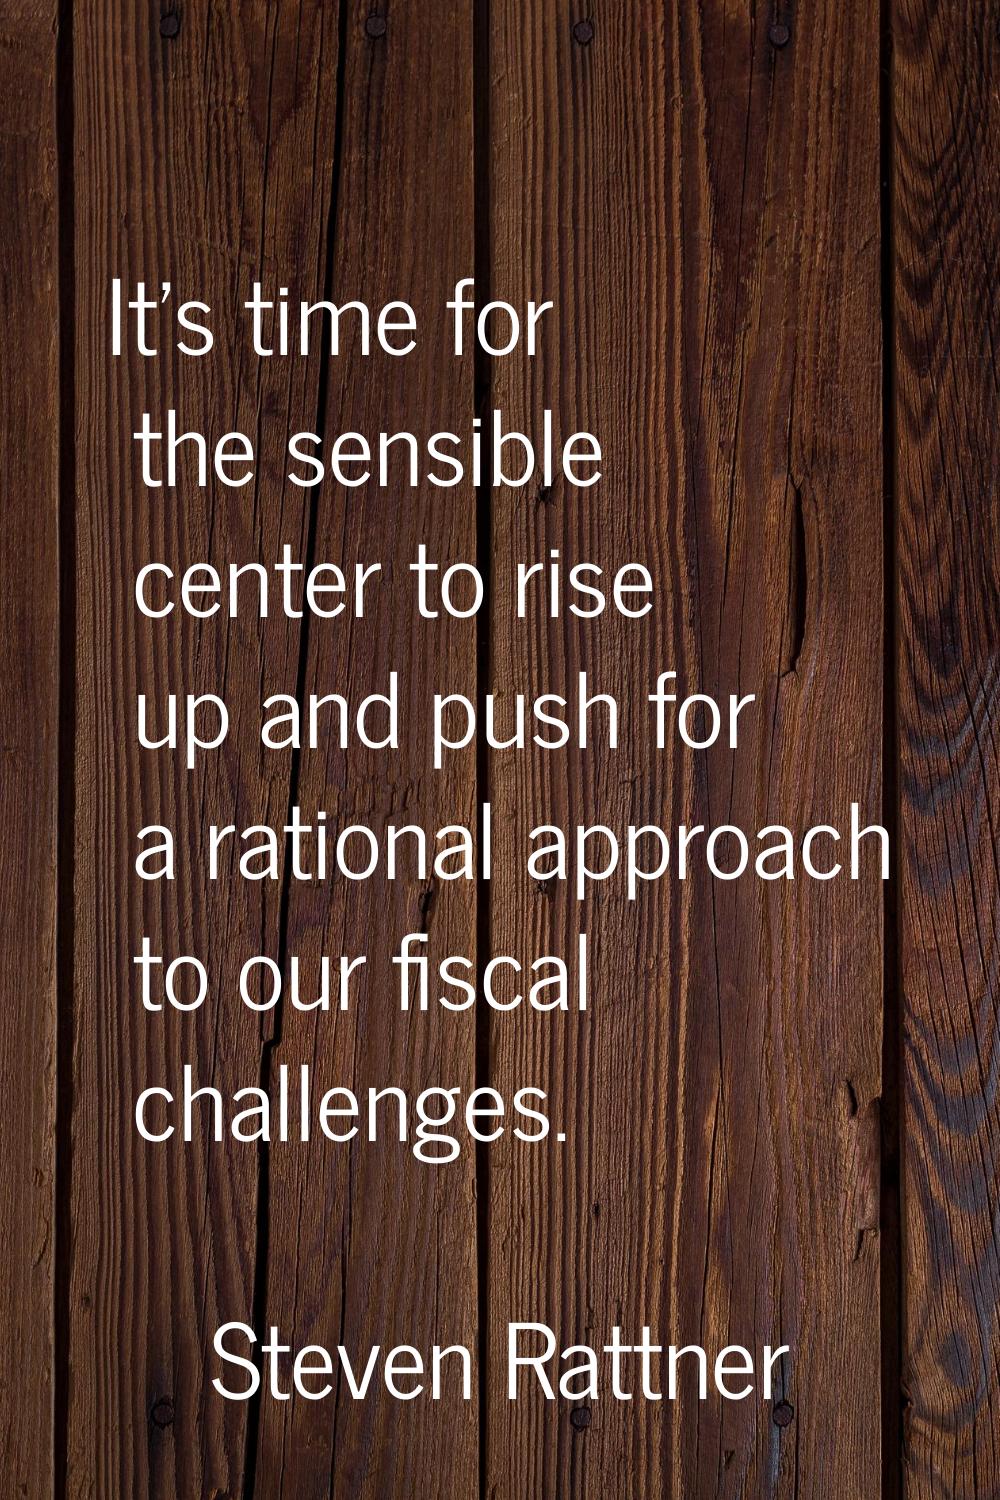 It's time for the sensible center to rise up and push for a rational approach to our fiscal challen